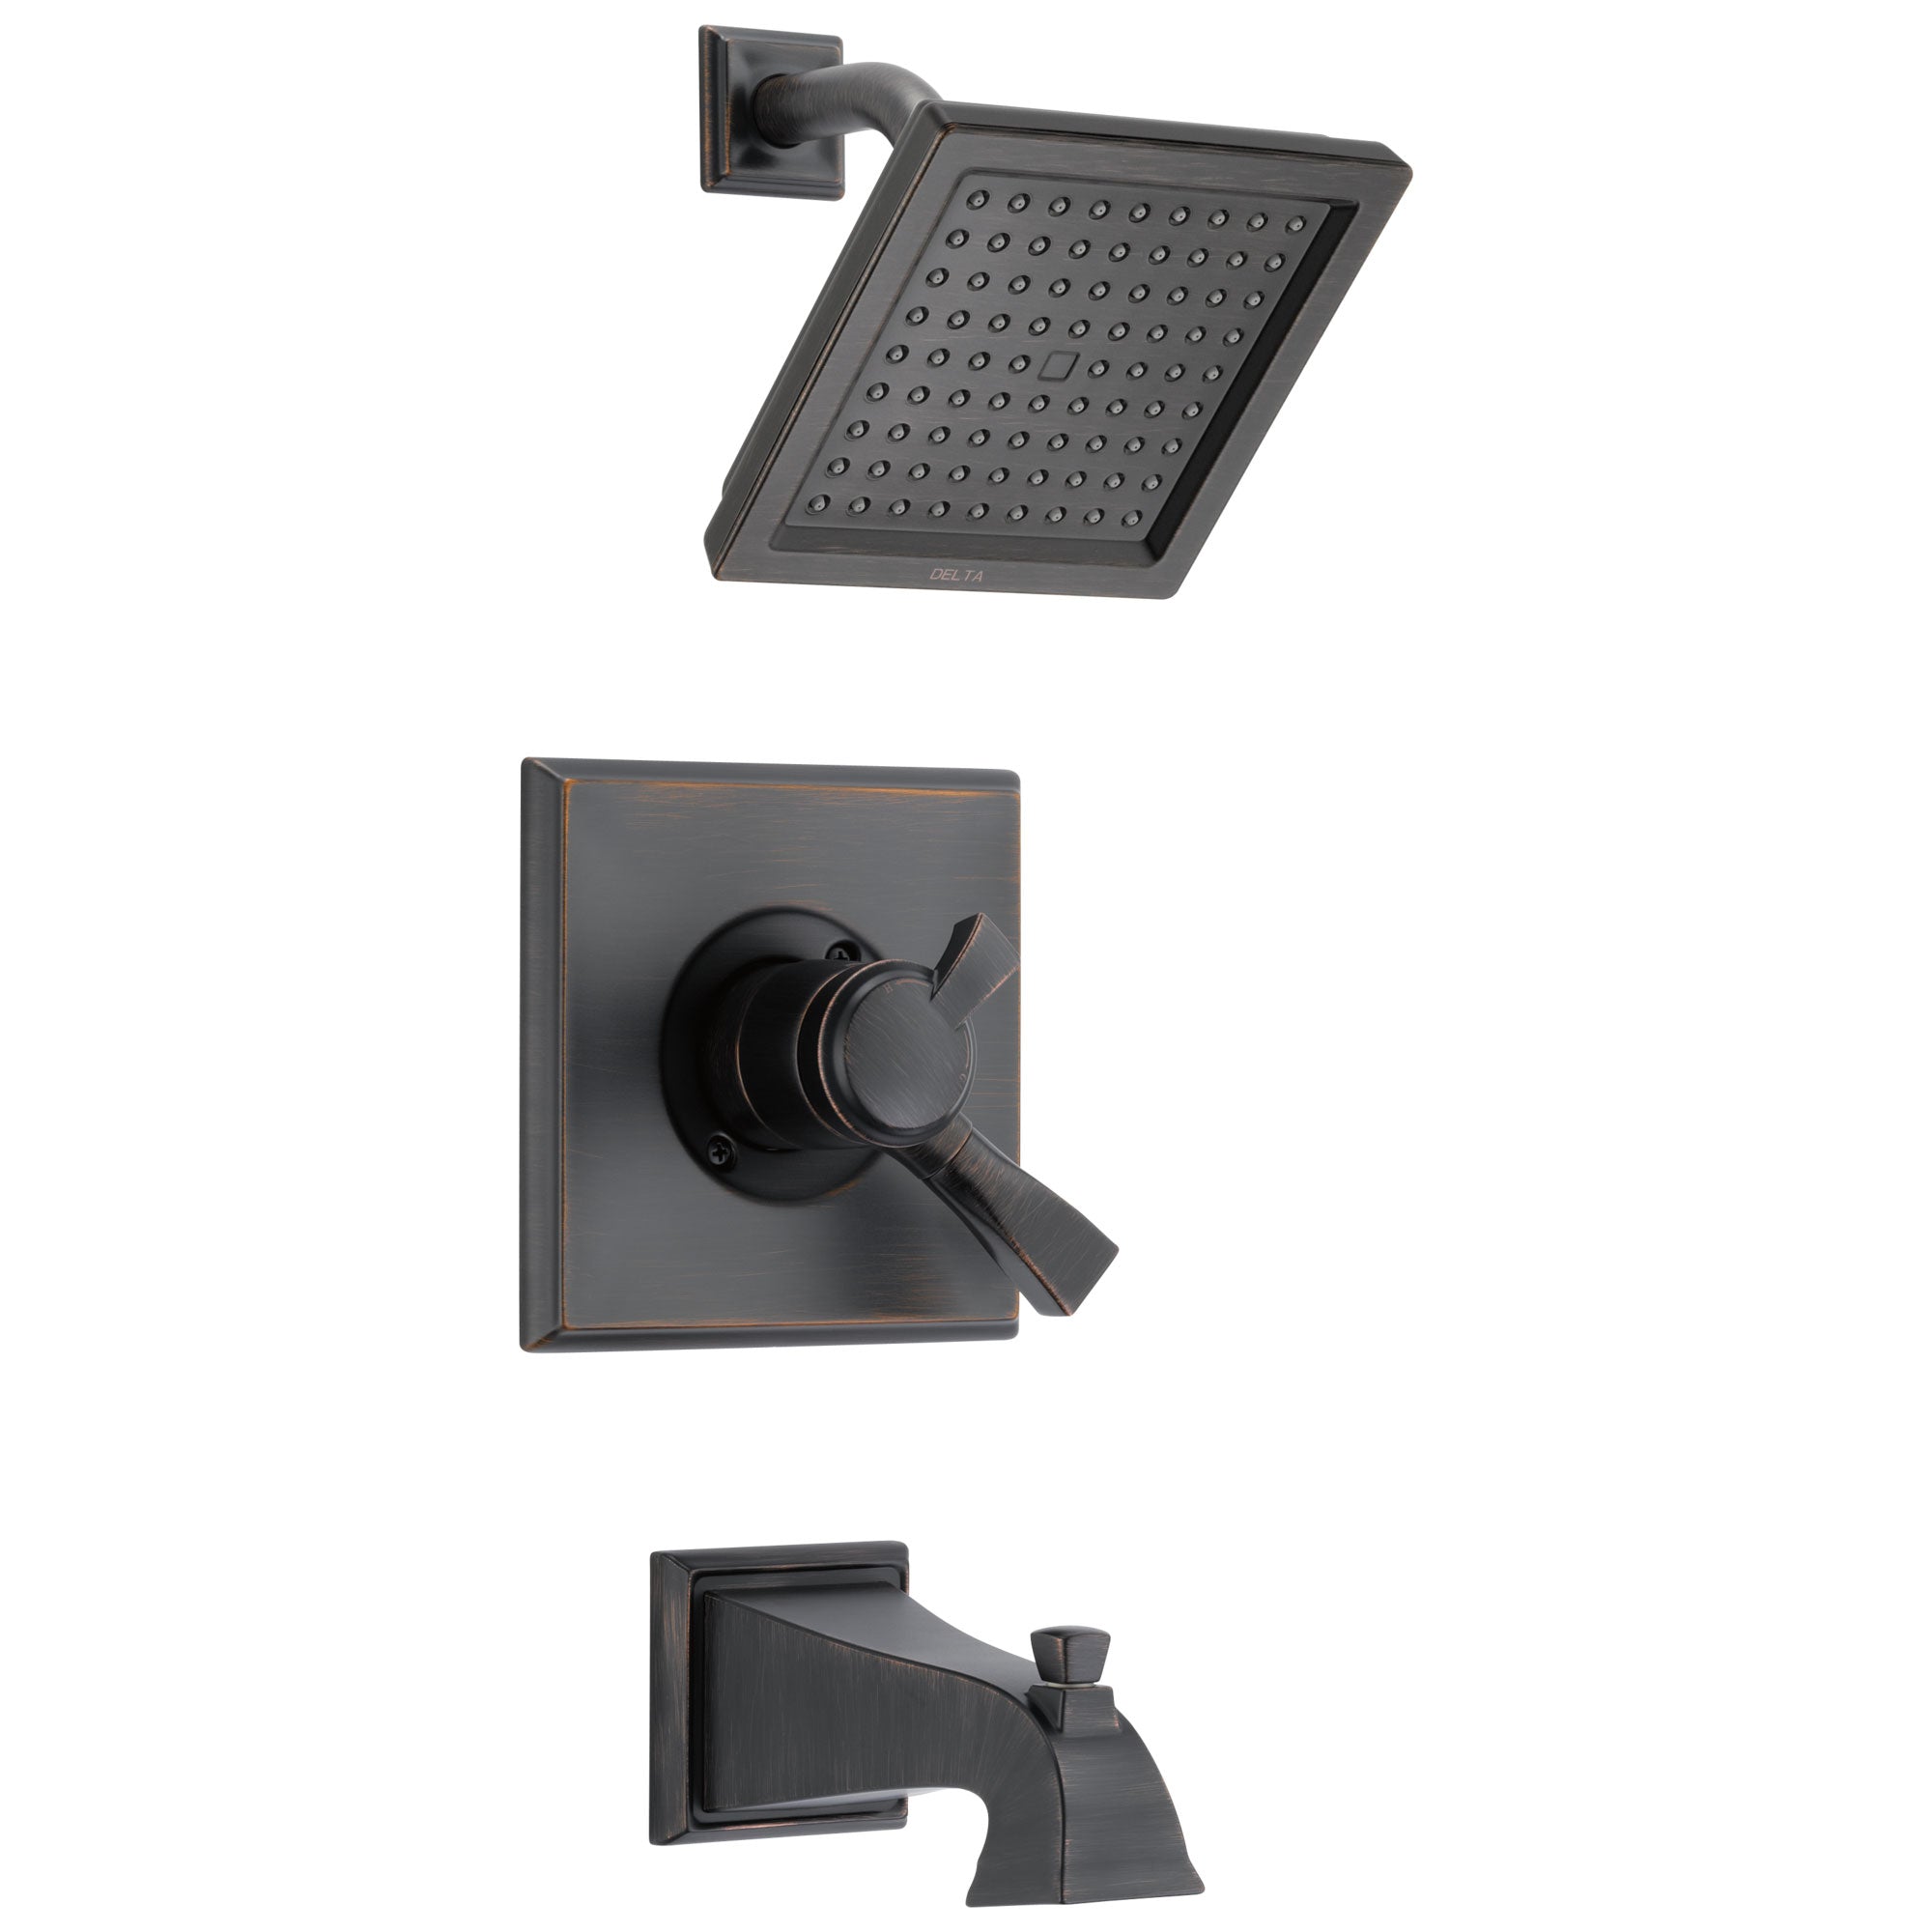 Delta Dryden Venetian Bronze Monitor 17 1.75 GPM Water Efficient Dual Control Tub and Shower Combination Includes Trim Kit and Rough Valve with Stops D2312V